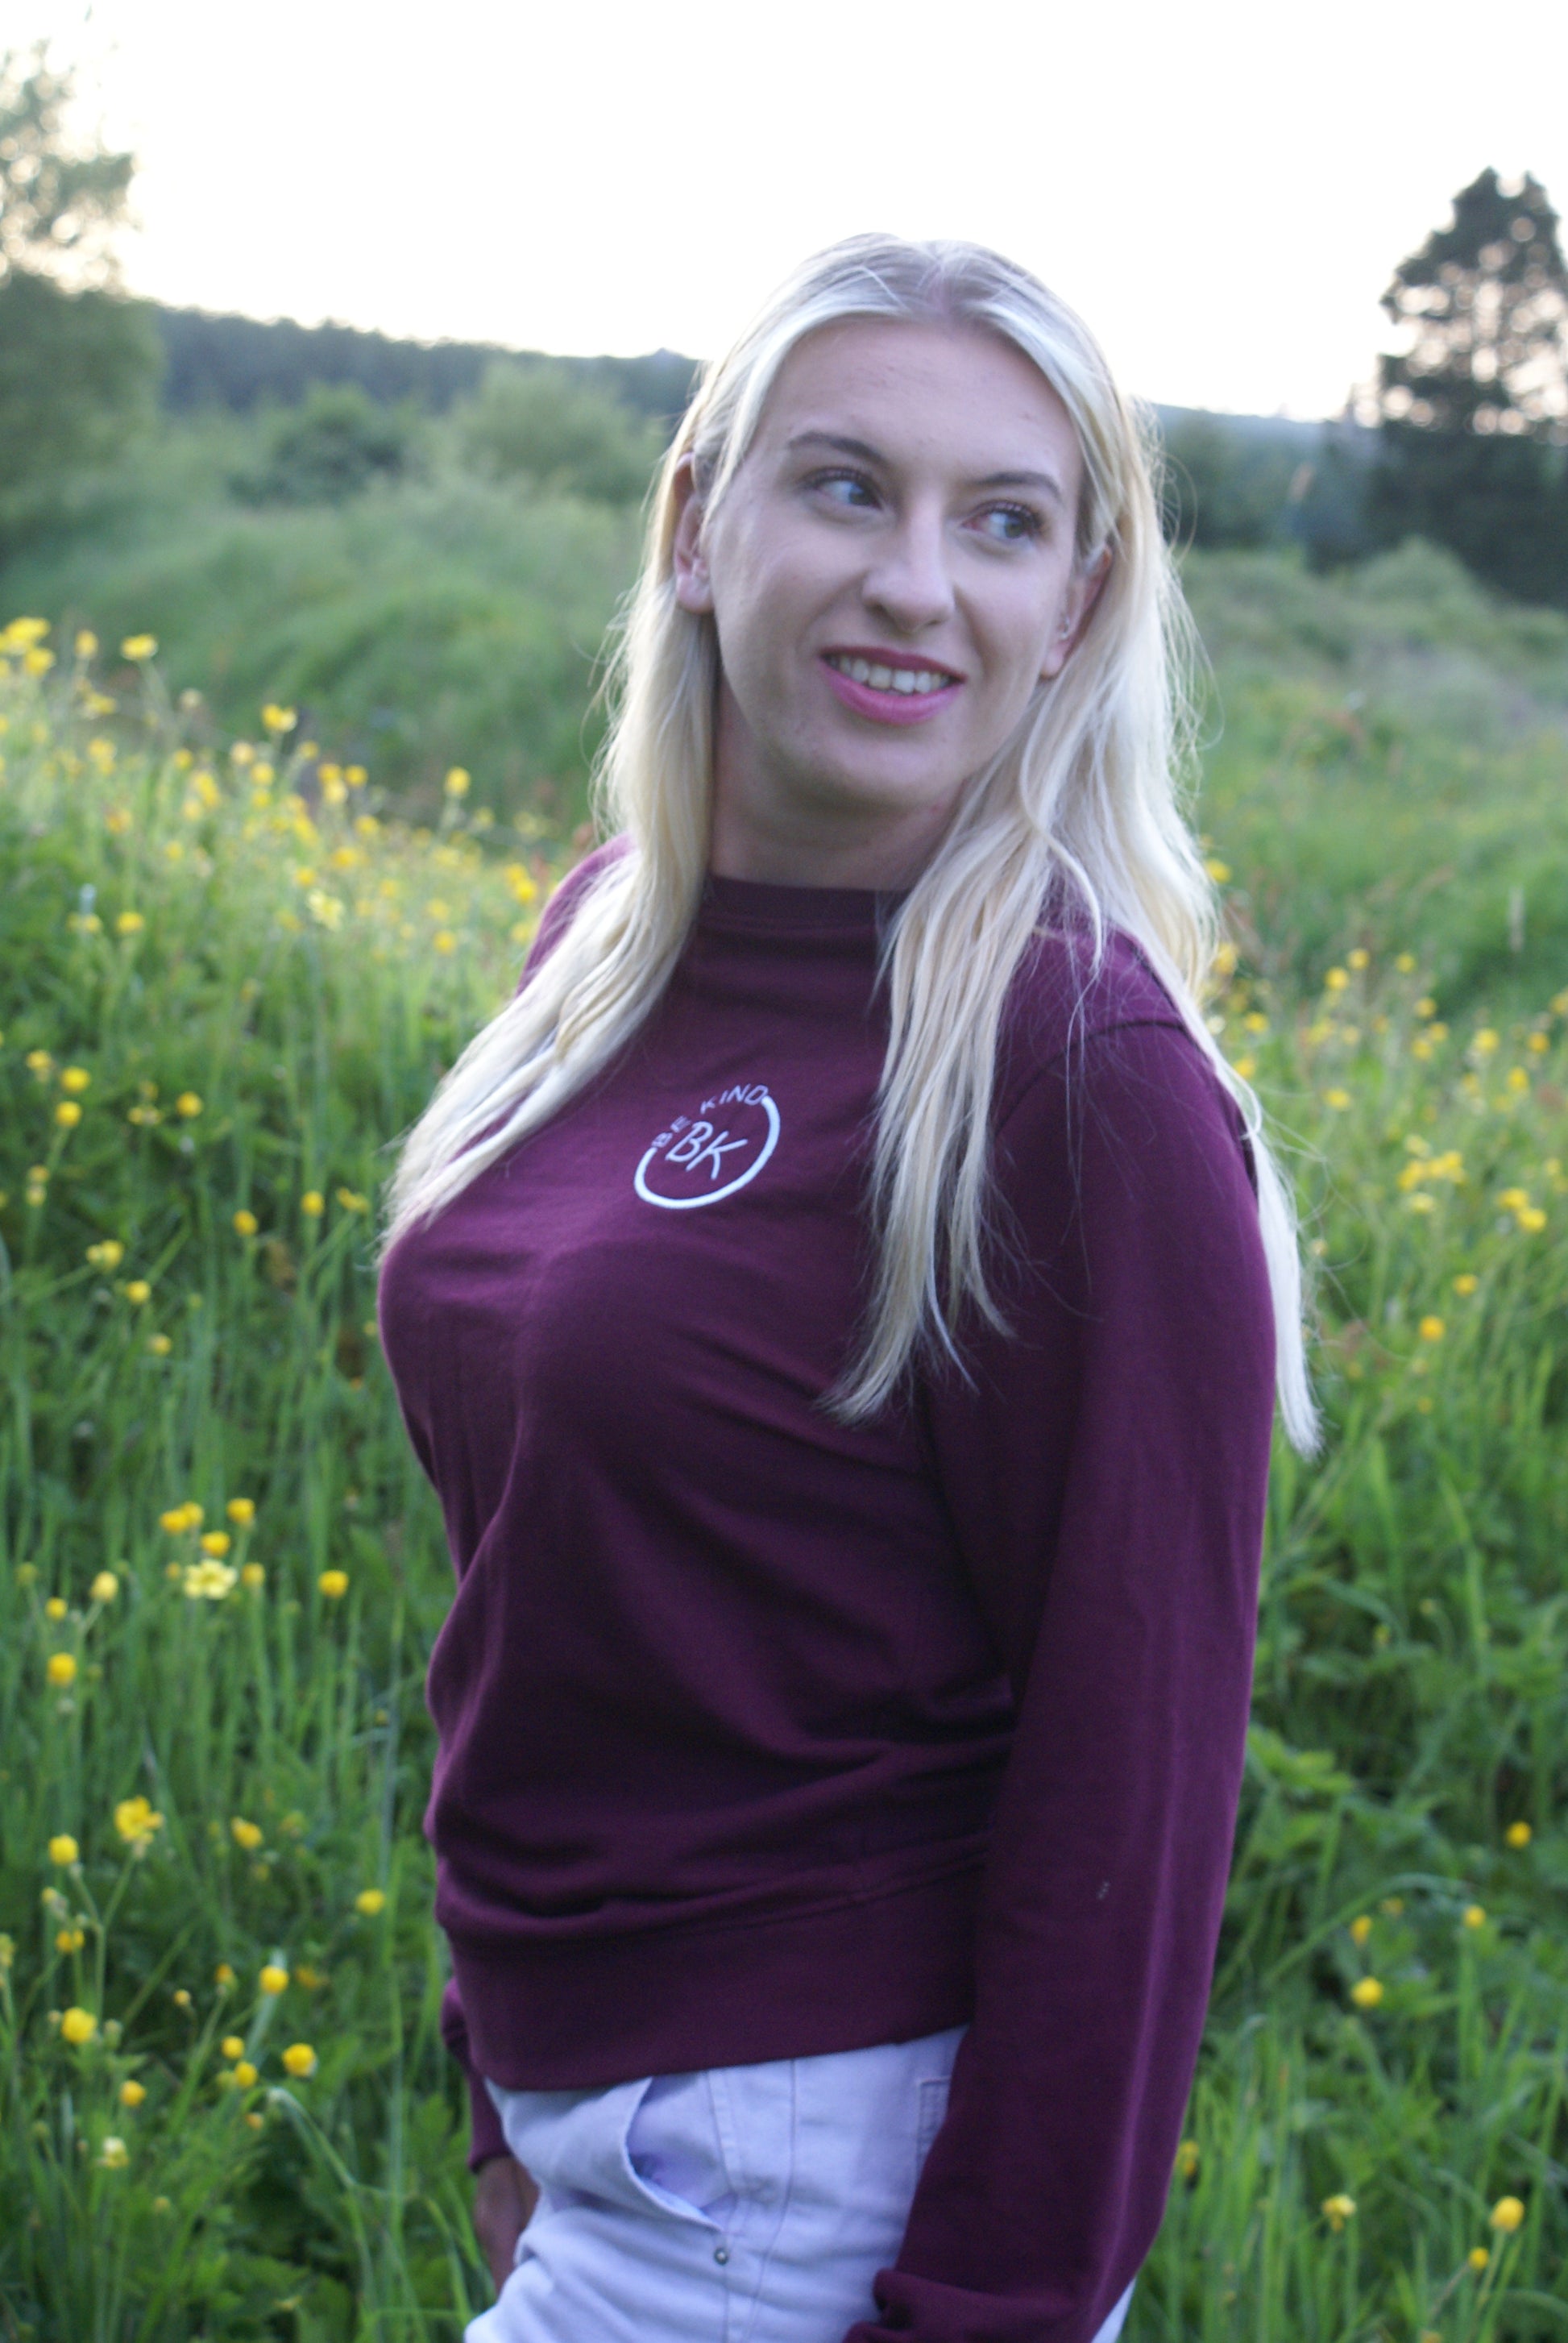 A woman looks back in a field full of flowers. she's wearing an Organic Cotton Burgundy sweatshirt from Be Kind Apparel's Freestyle Range